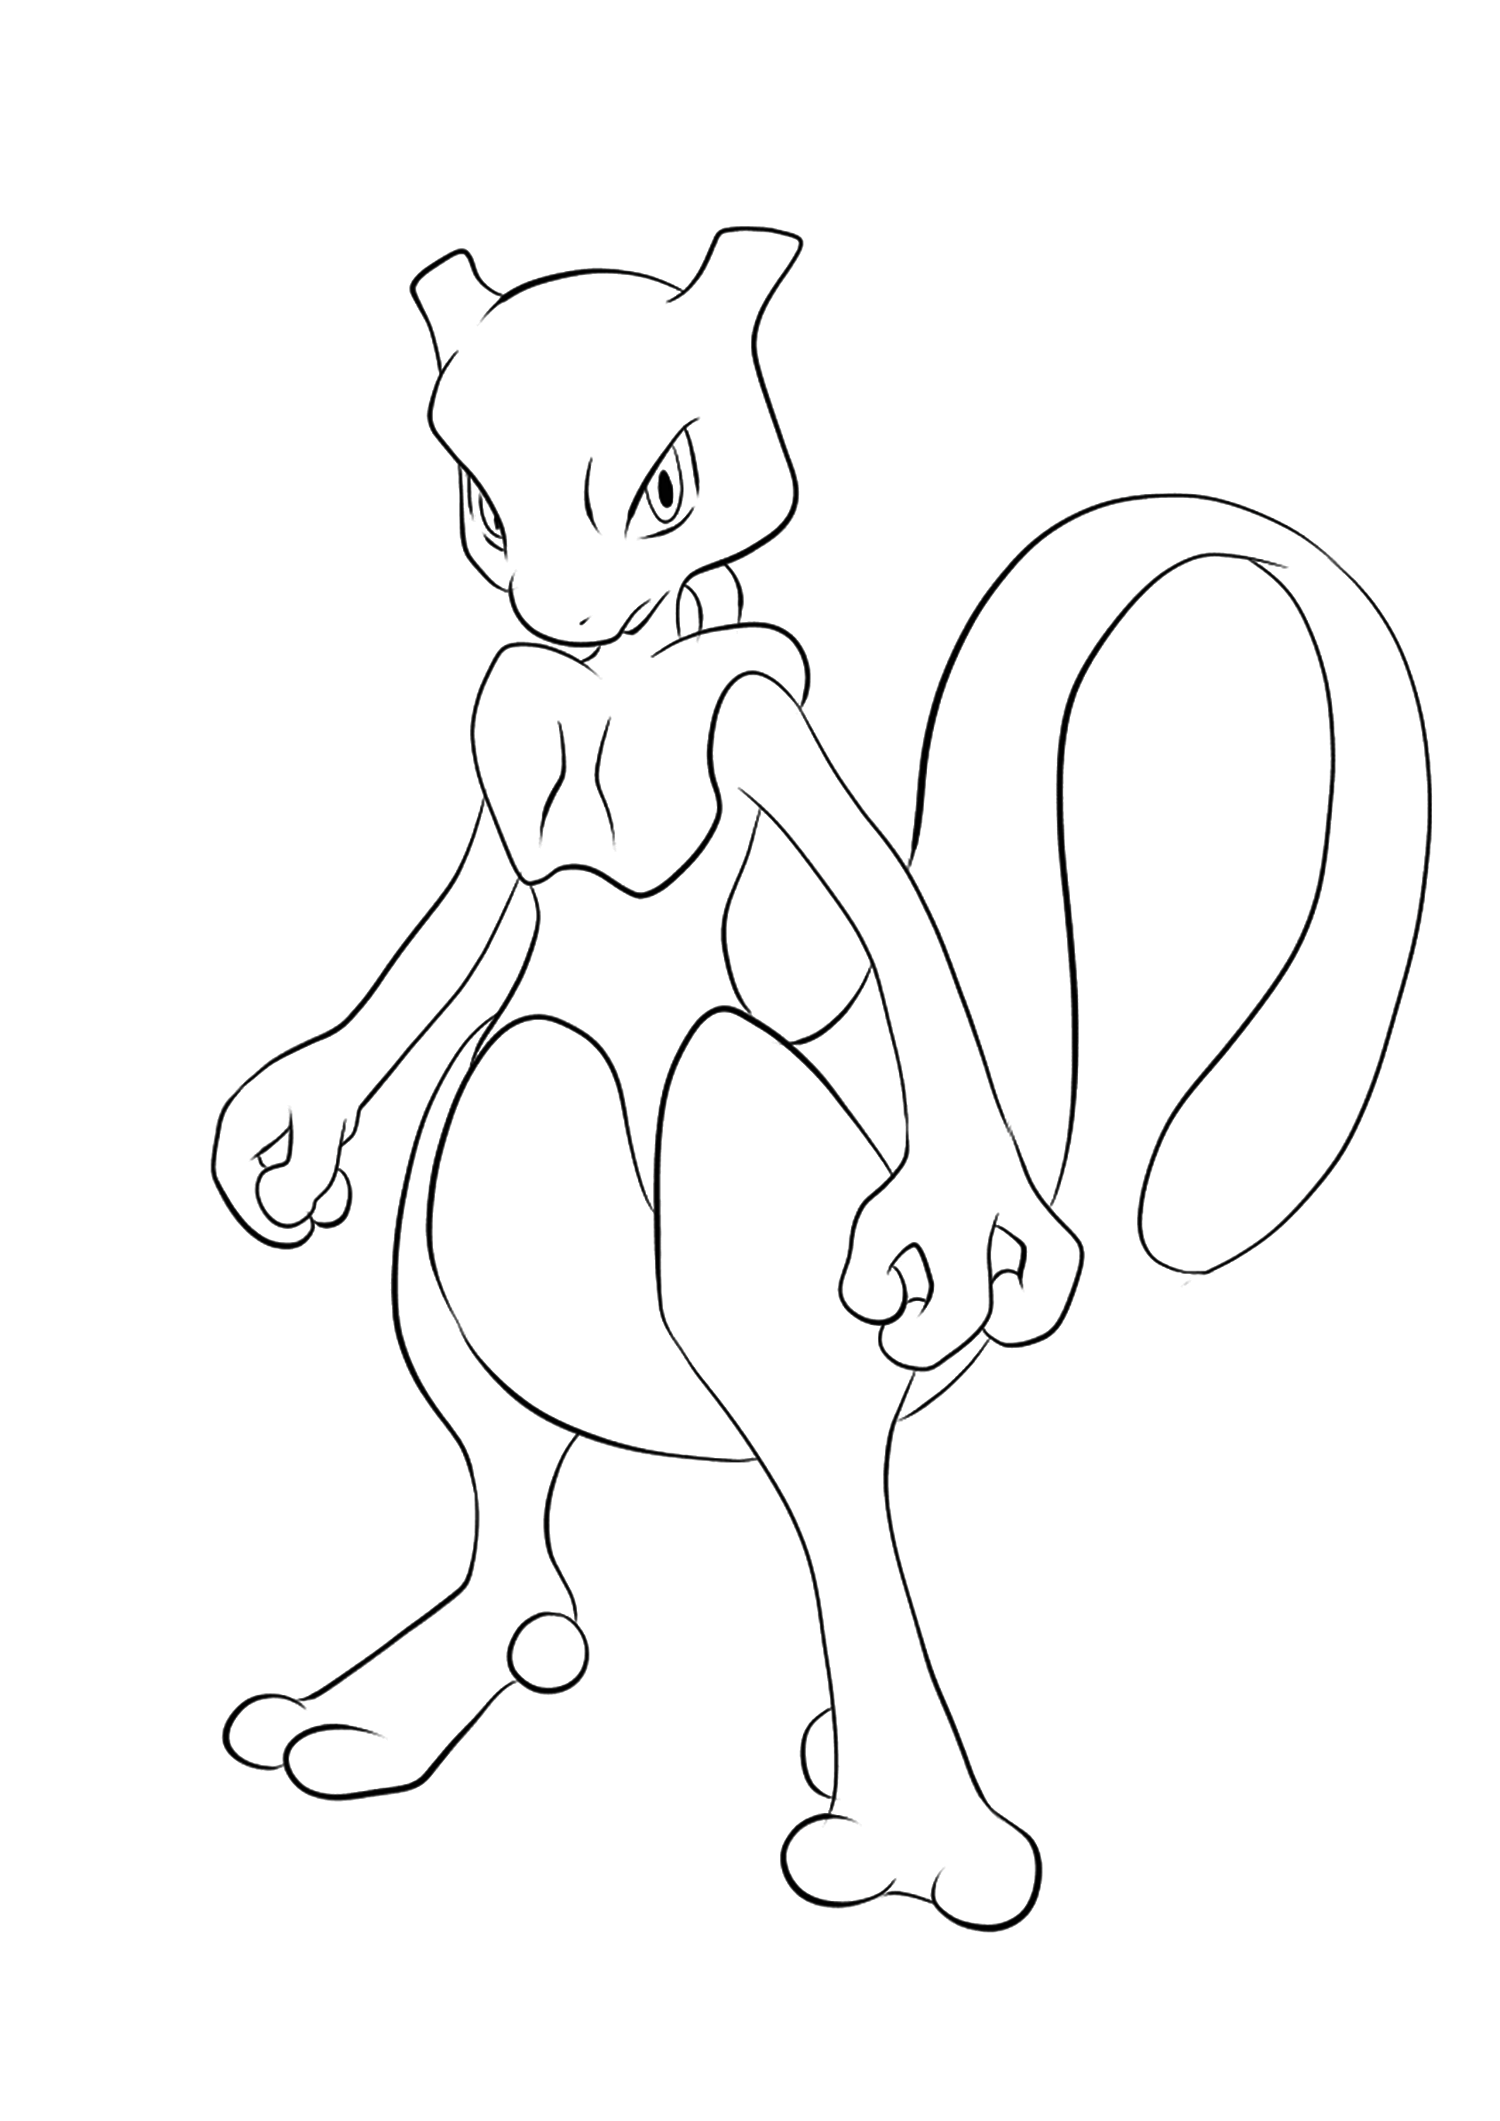 Mewtwo (No.150). Coloriage de Mewtwo (Mewtwo), Pokémon de Génération I, de type : PsyOriginal image credit: Pokemon linearts by Lilly Gerbil on Deviantart.Permission:  All rights reserved © Pokemon company and Ken Sugimori.